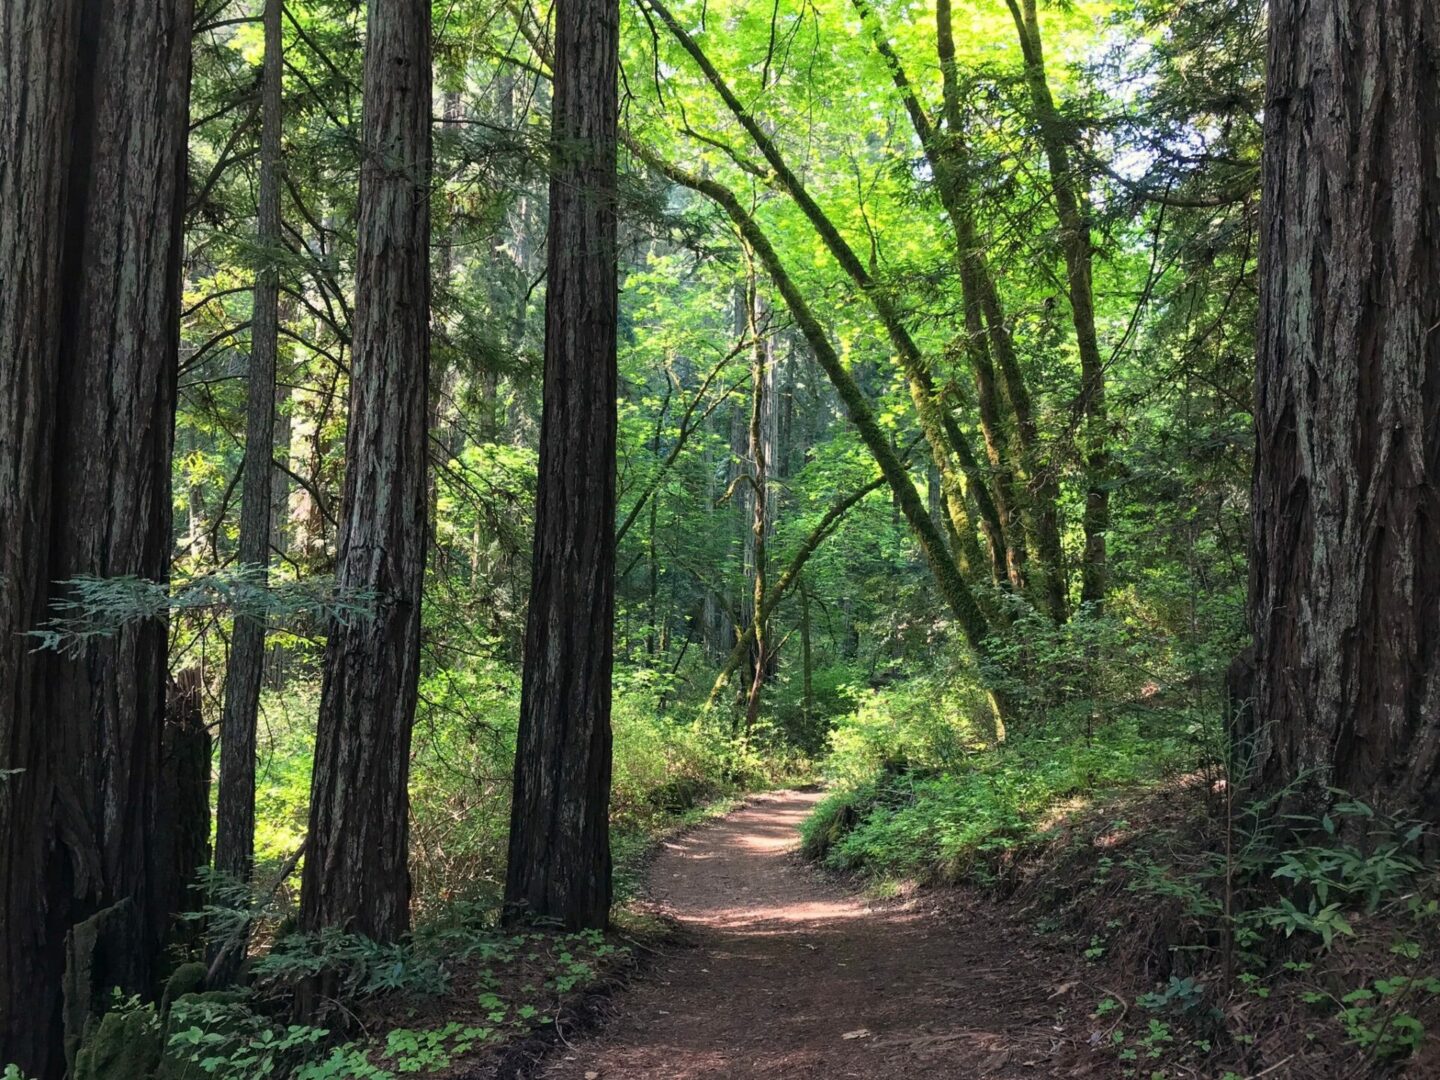 Hiking trail covered in the shade of redwood trees